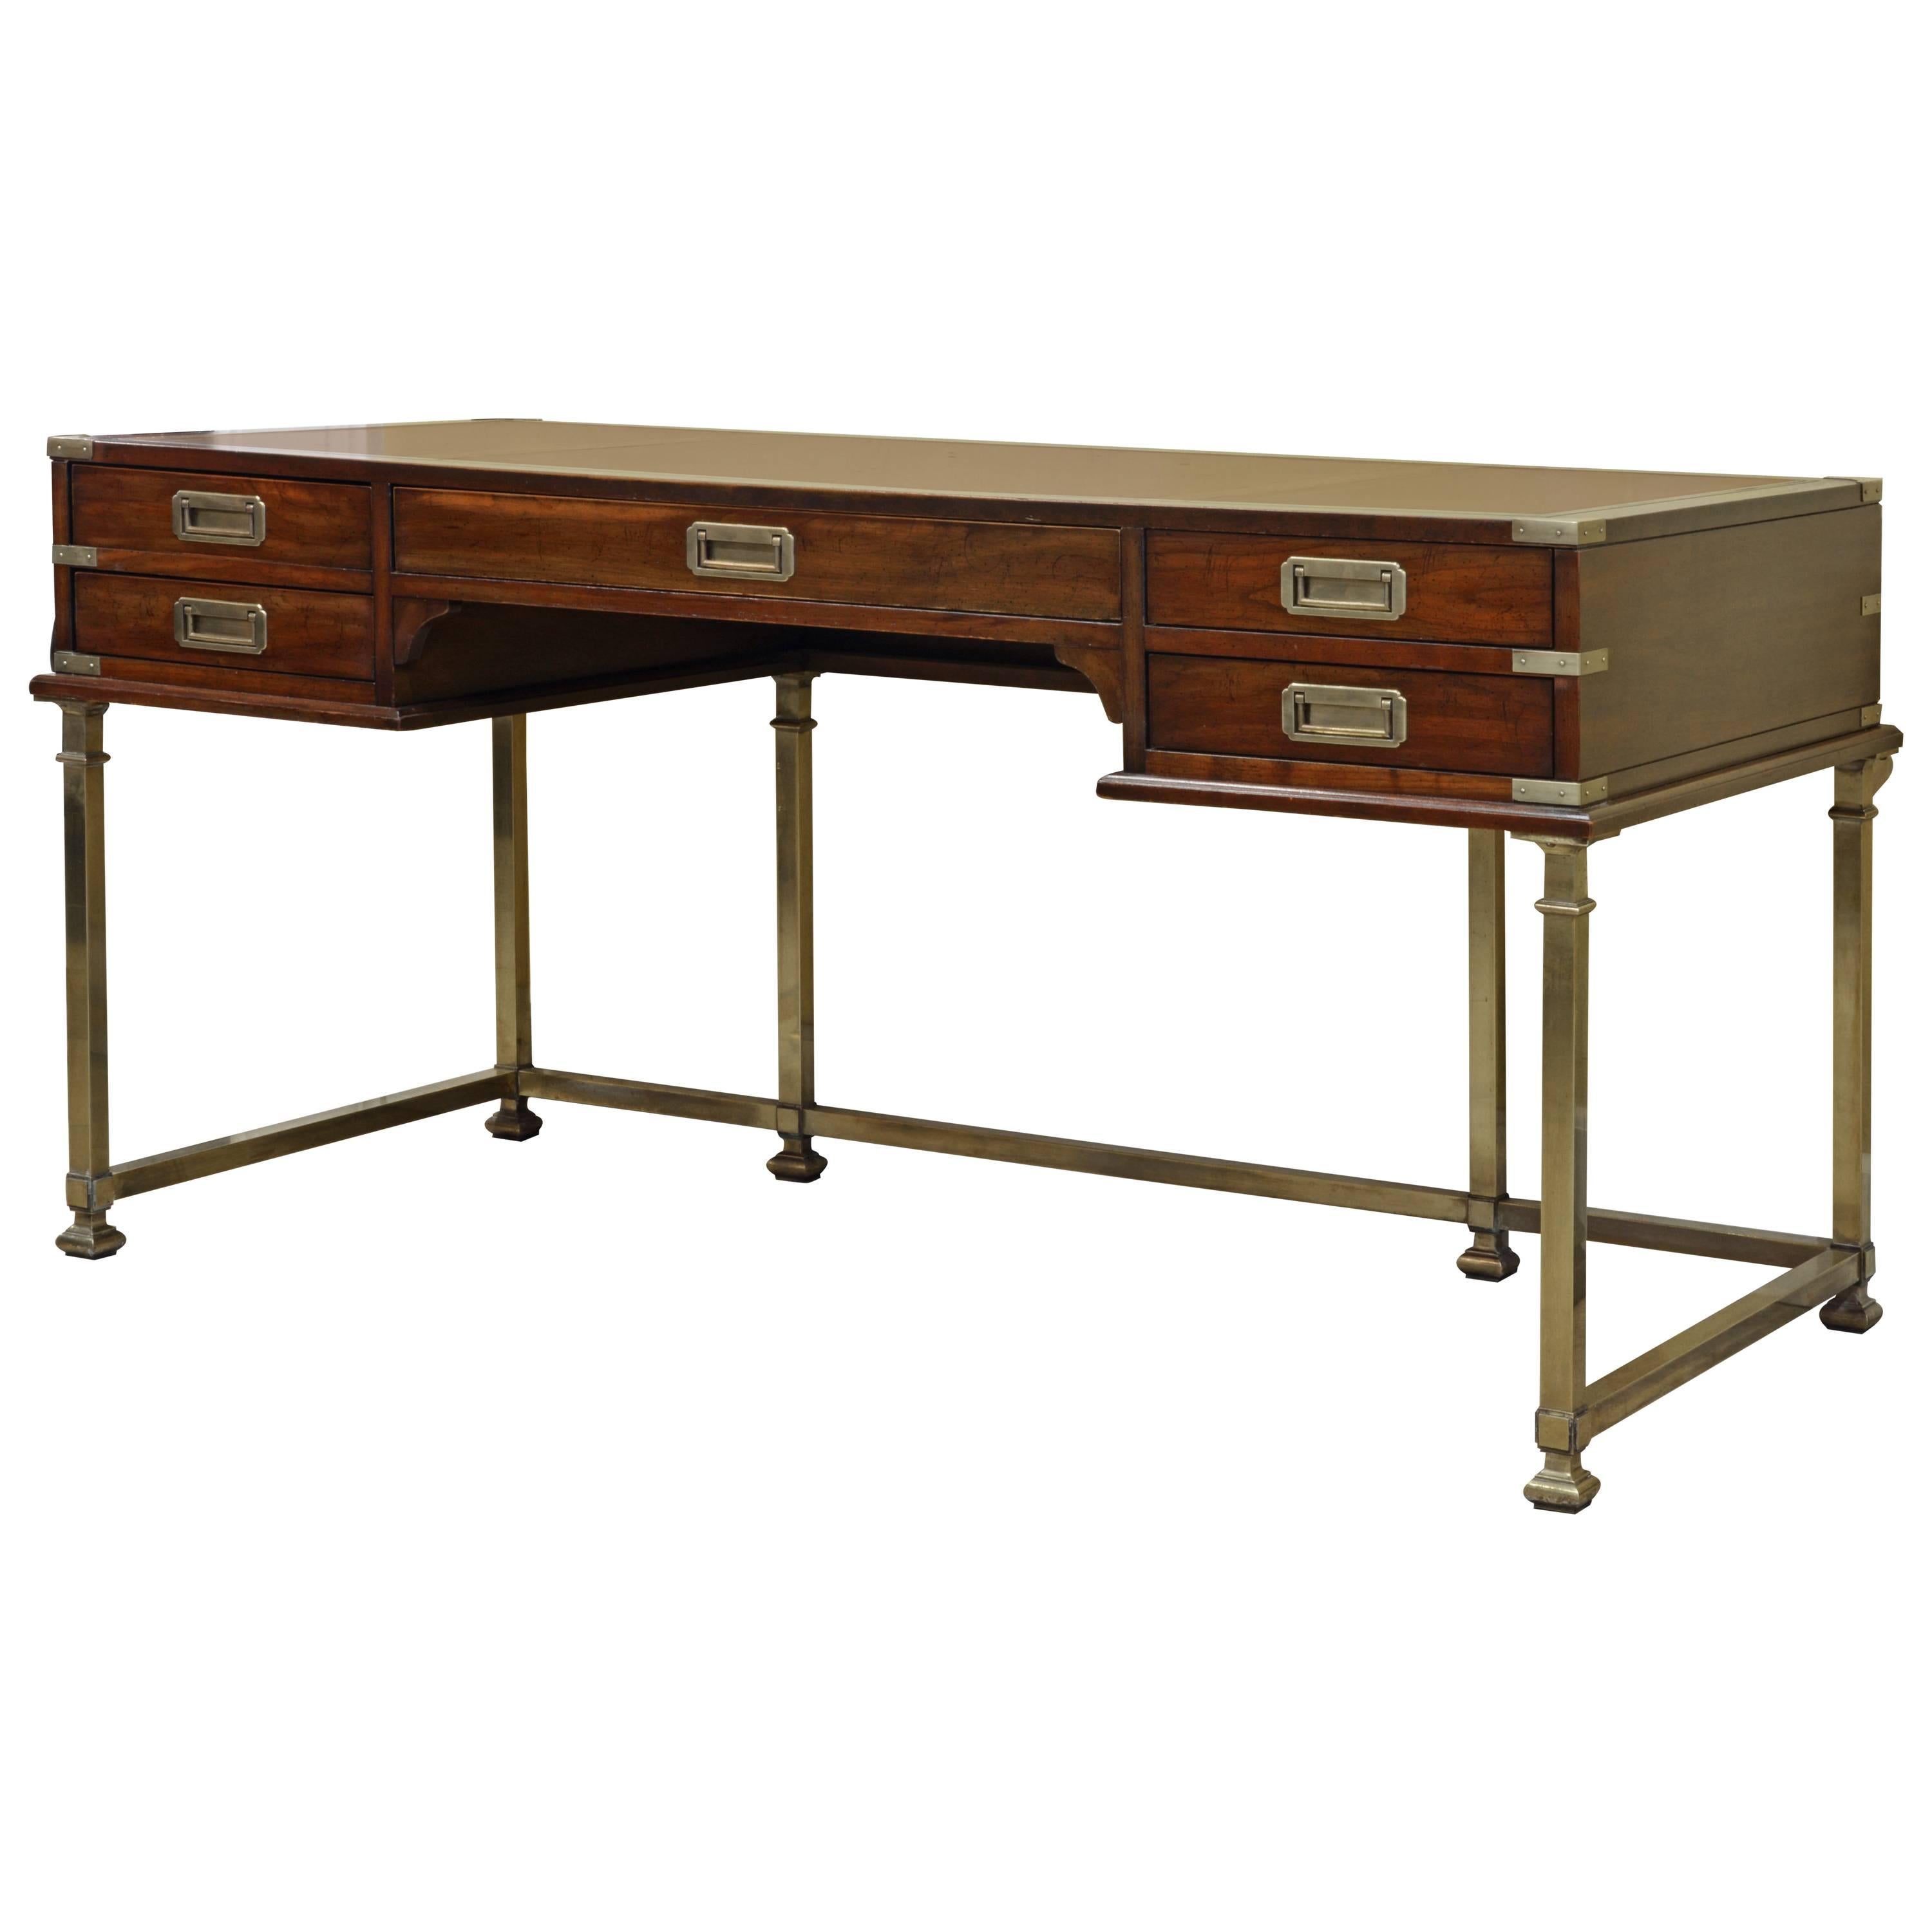 Mahogany and Brass Leather Top Campaign Style Executive Desk by Sligh, Michigan